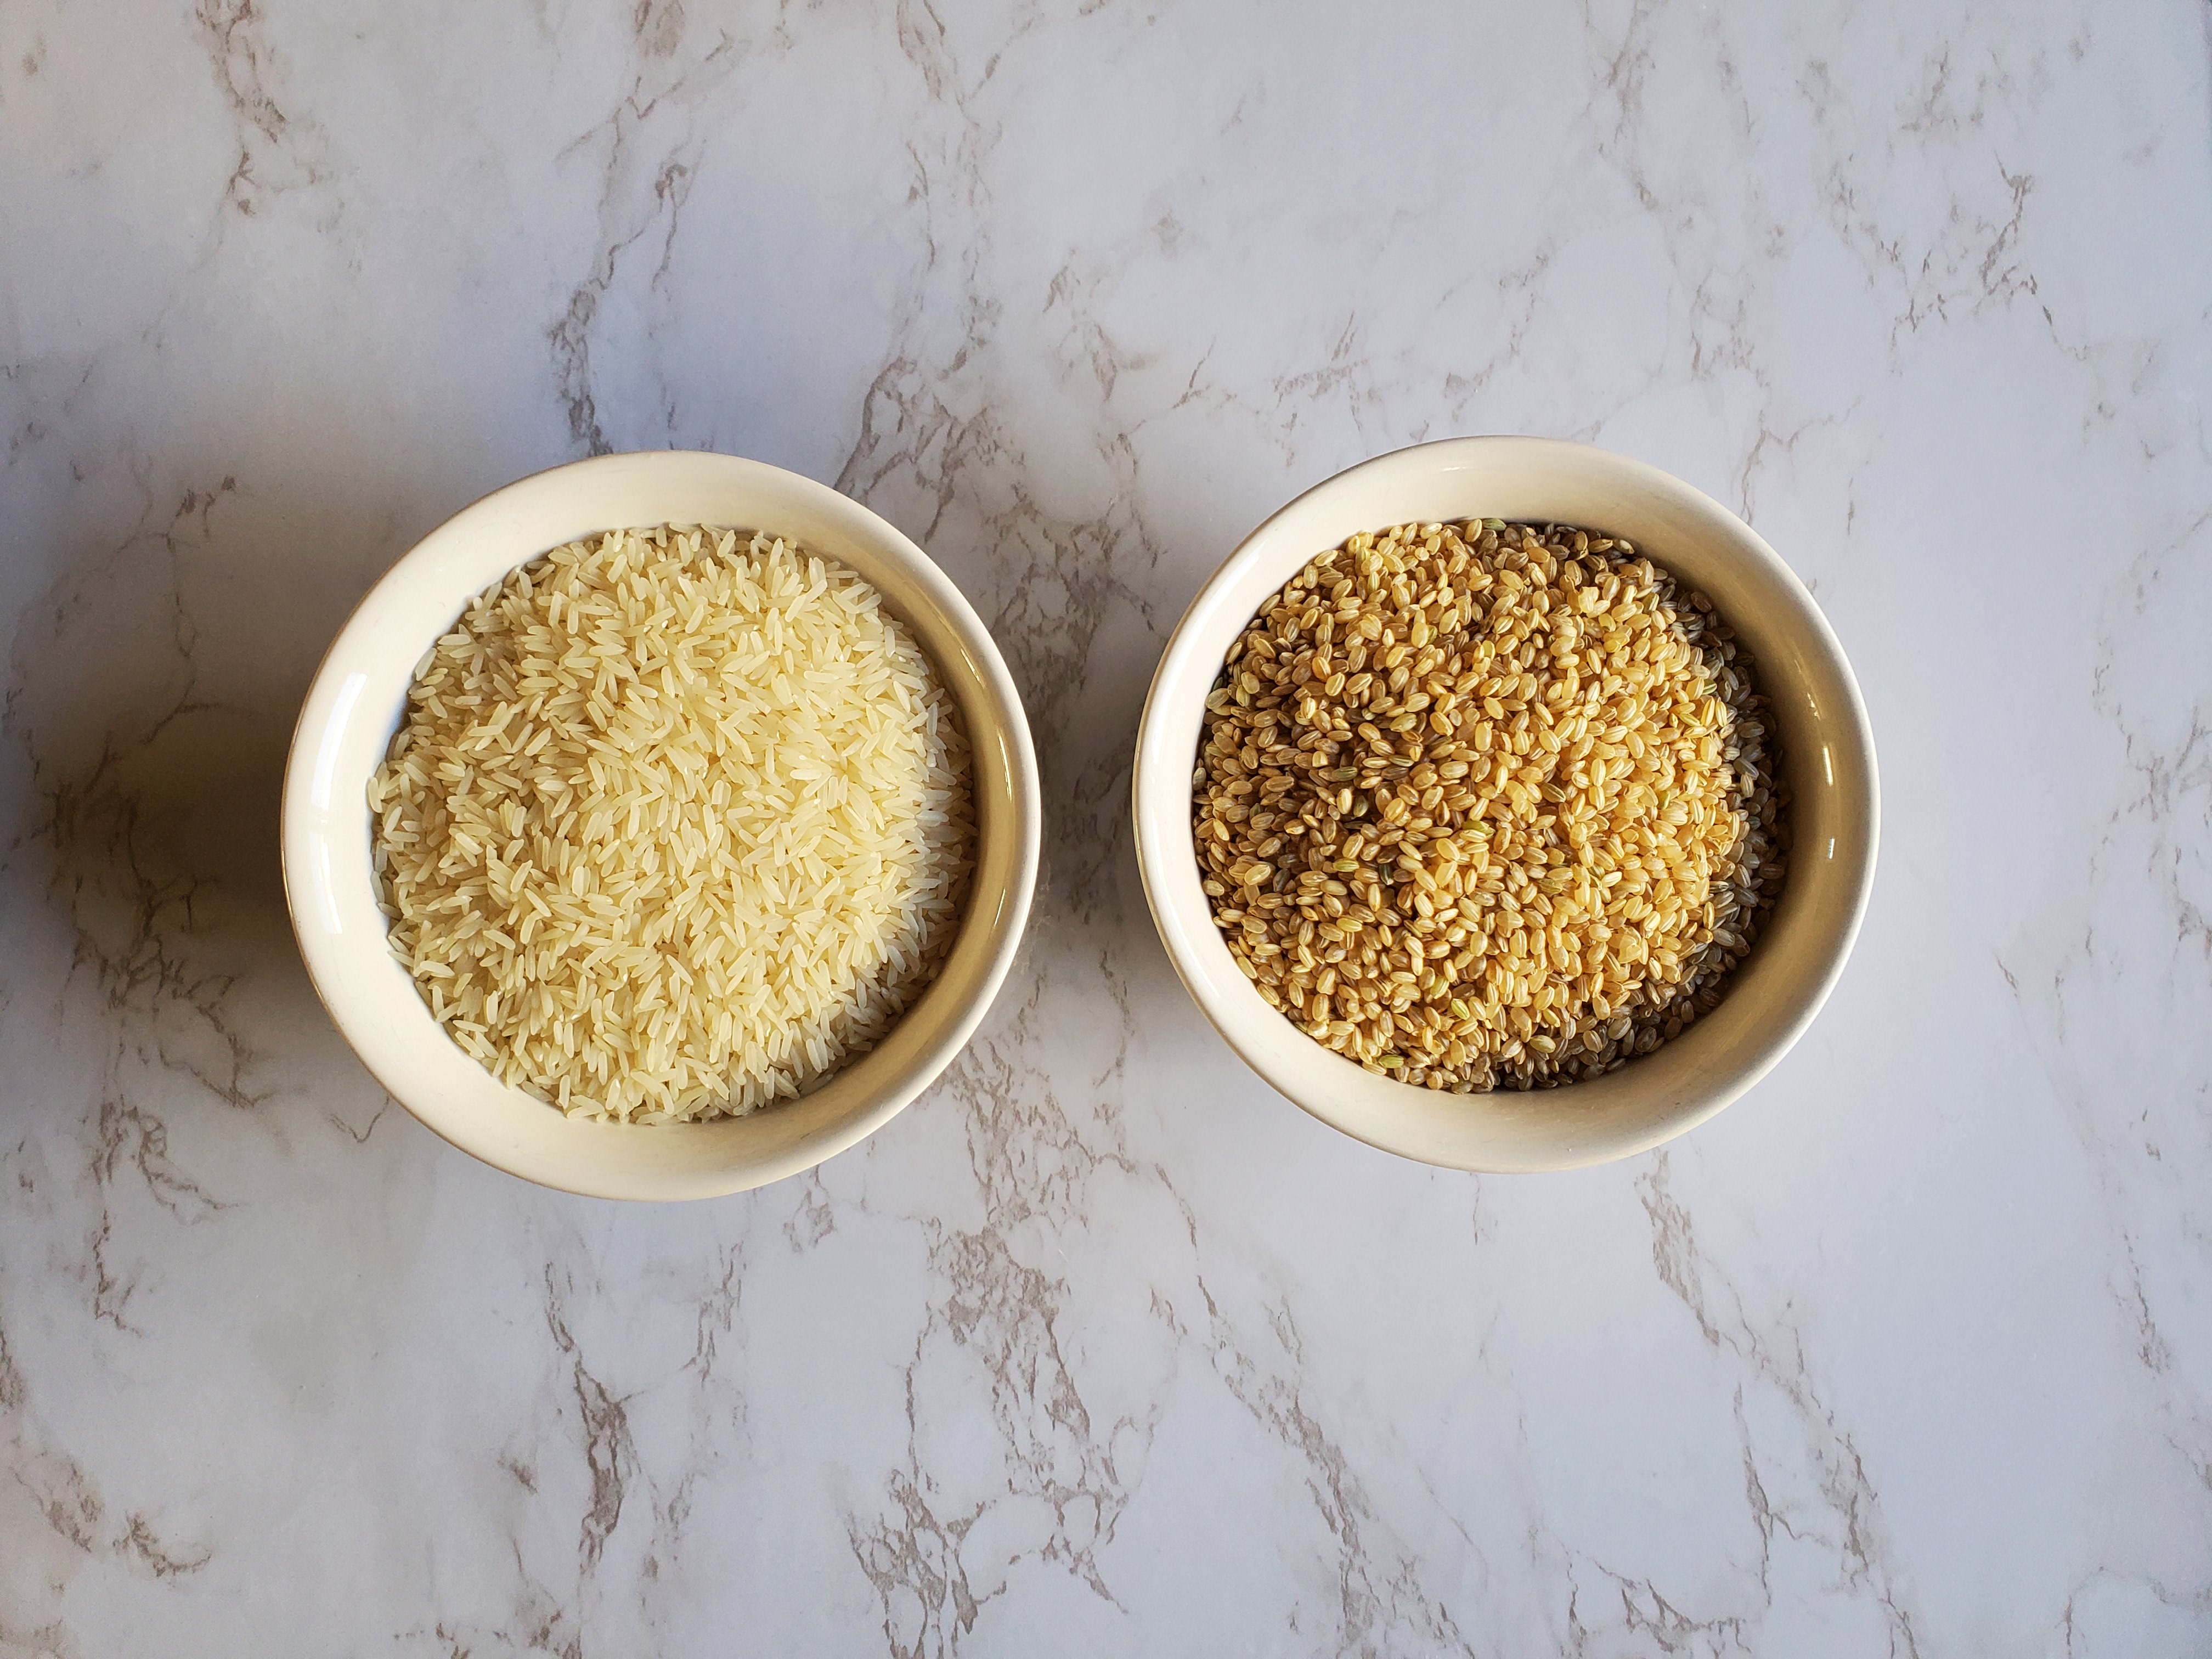 A white bowl on the left is filled with white jasmine rice and the white bowl on the left if filled with brown short grain rice, both against a white marble background.